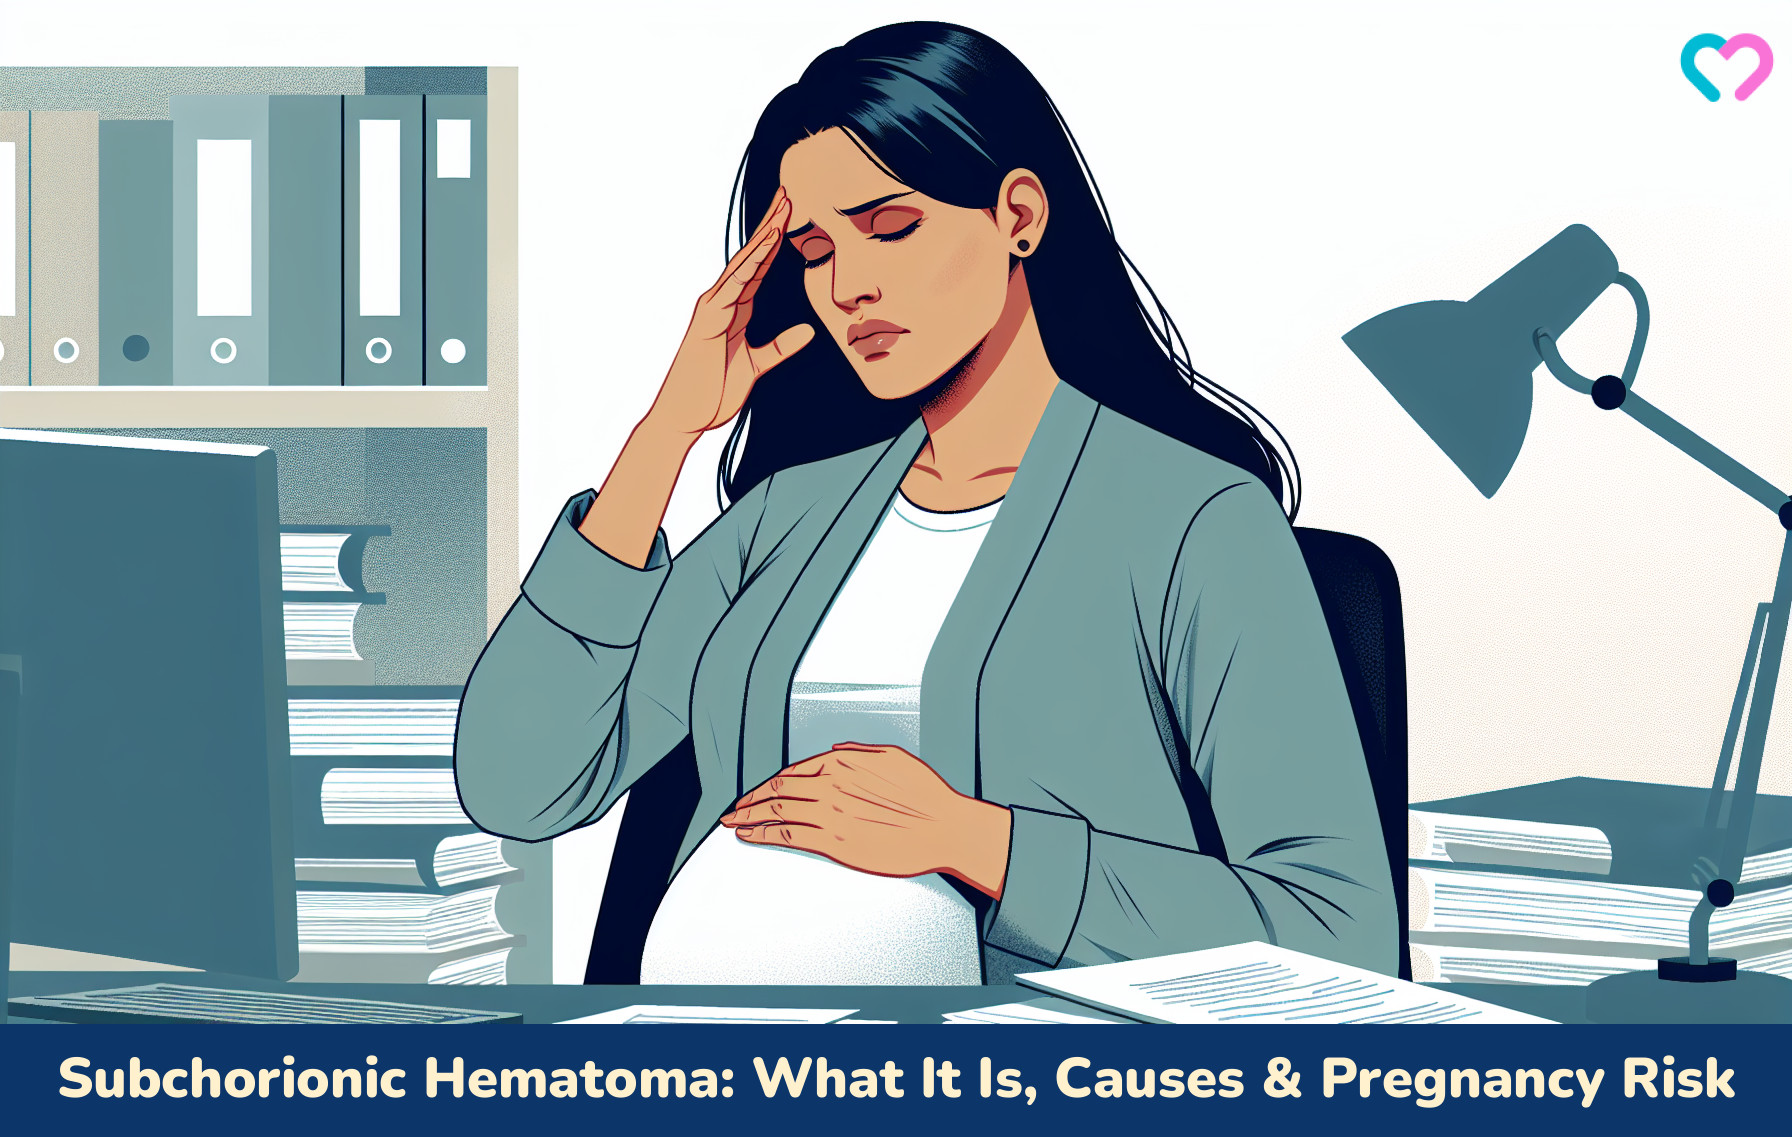 Subchorionic Hematoma: What It Is, Causes & Pregnancy Risk_illustration